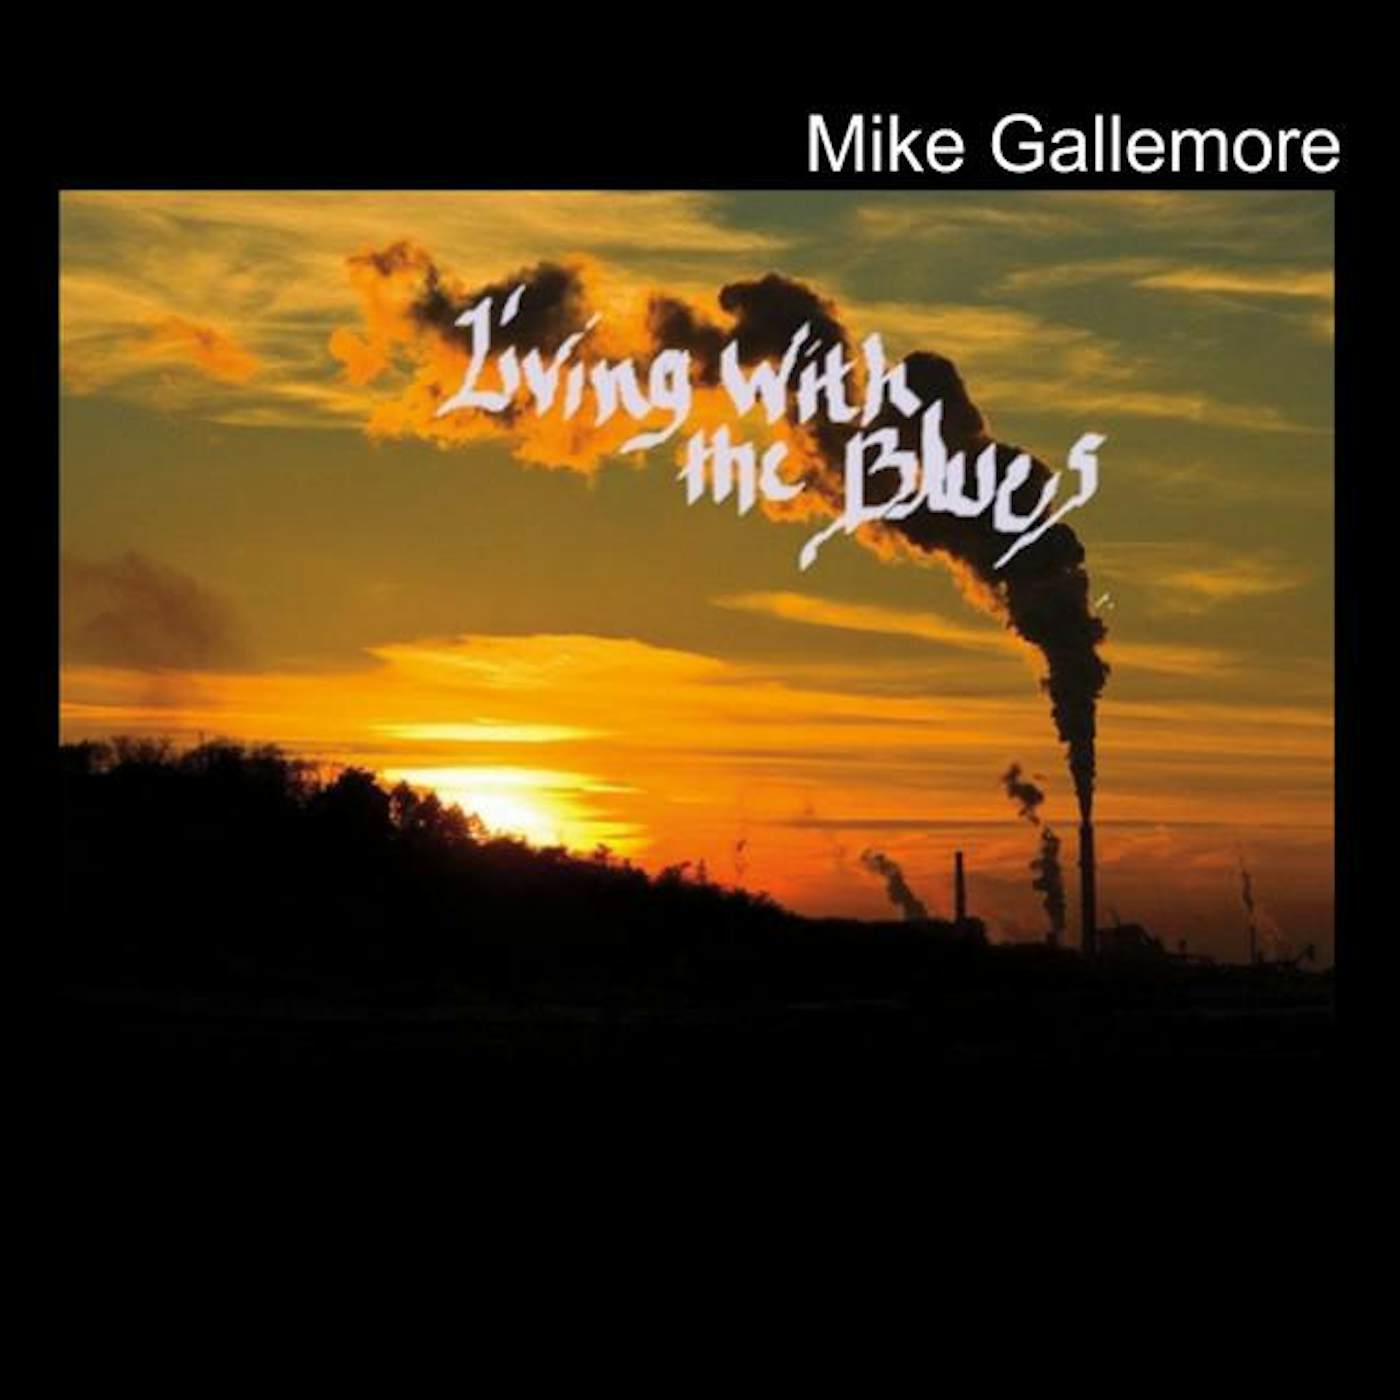 Mike Gallemore